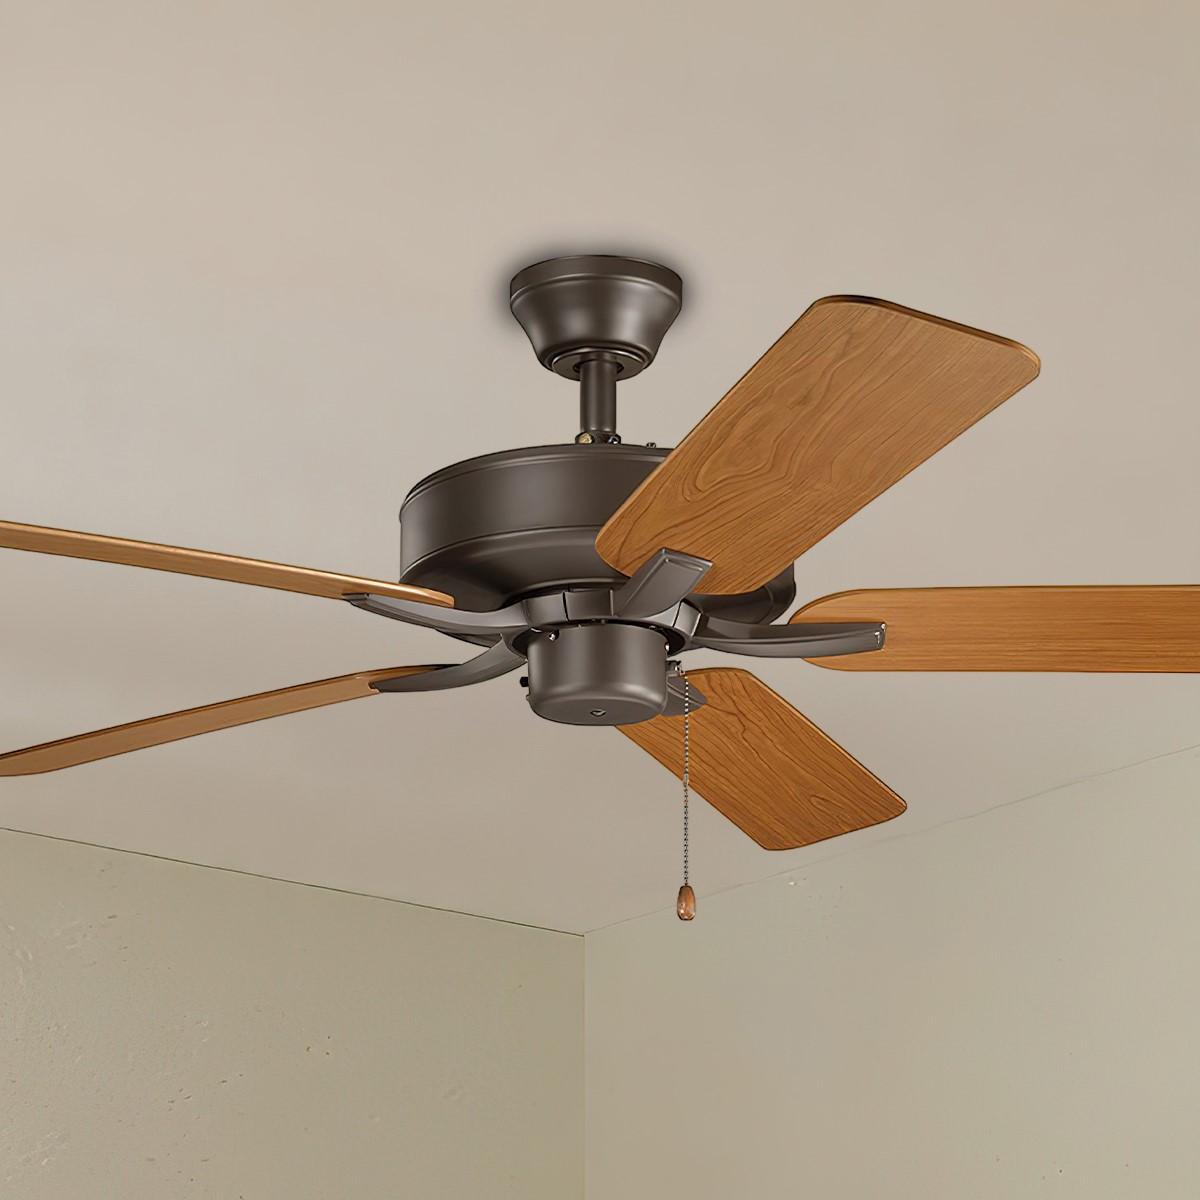 Basics Pro 52 Inch Ceiling Fan With Pull Chain